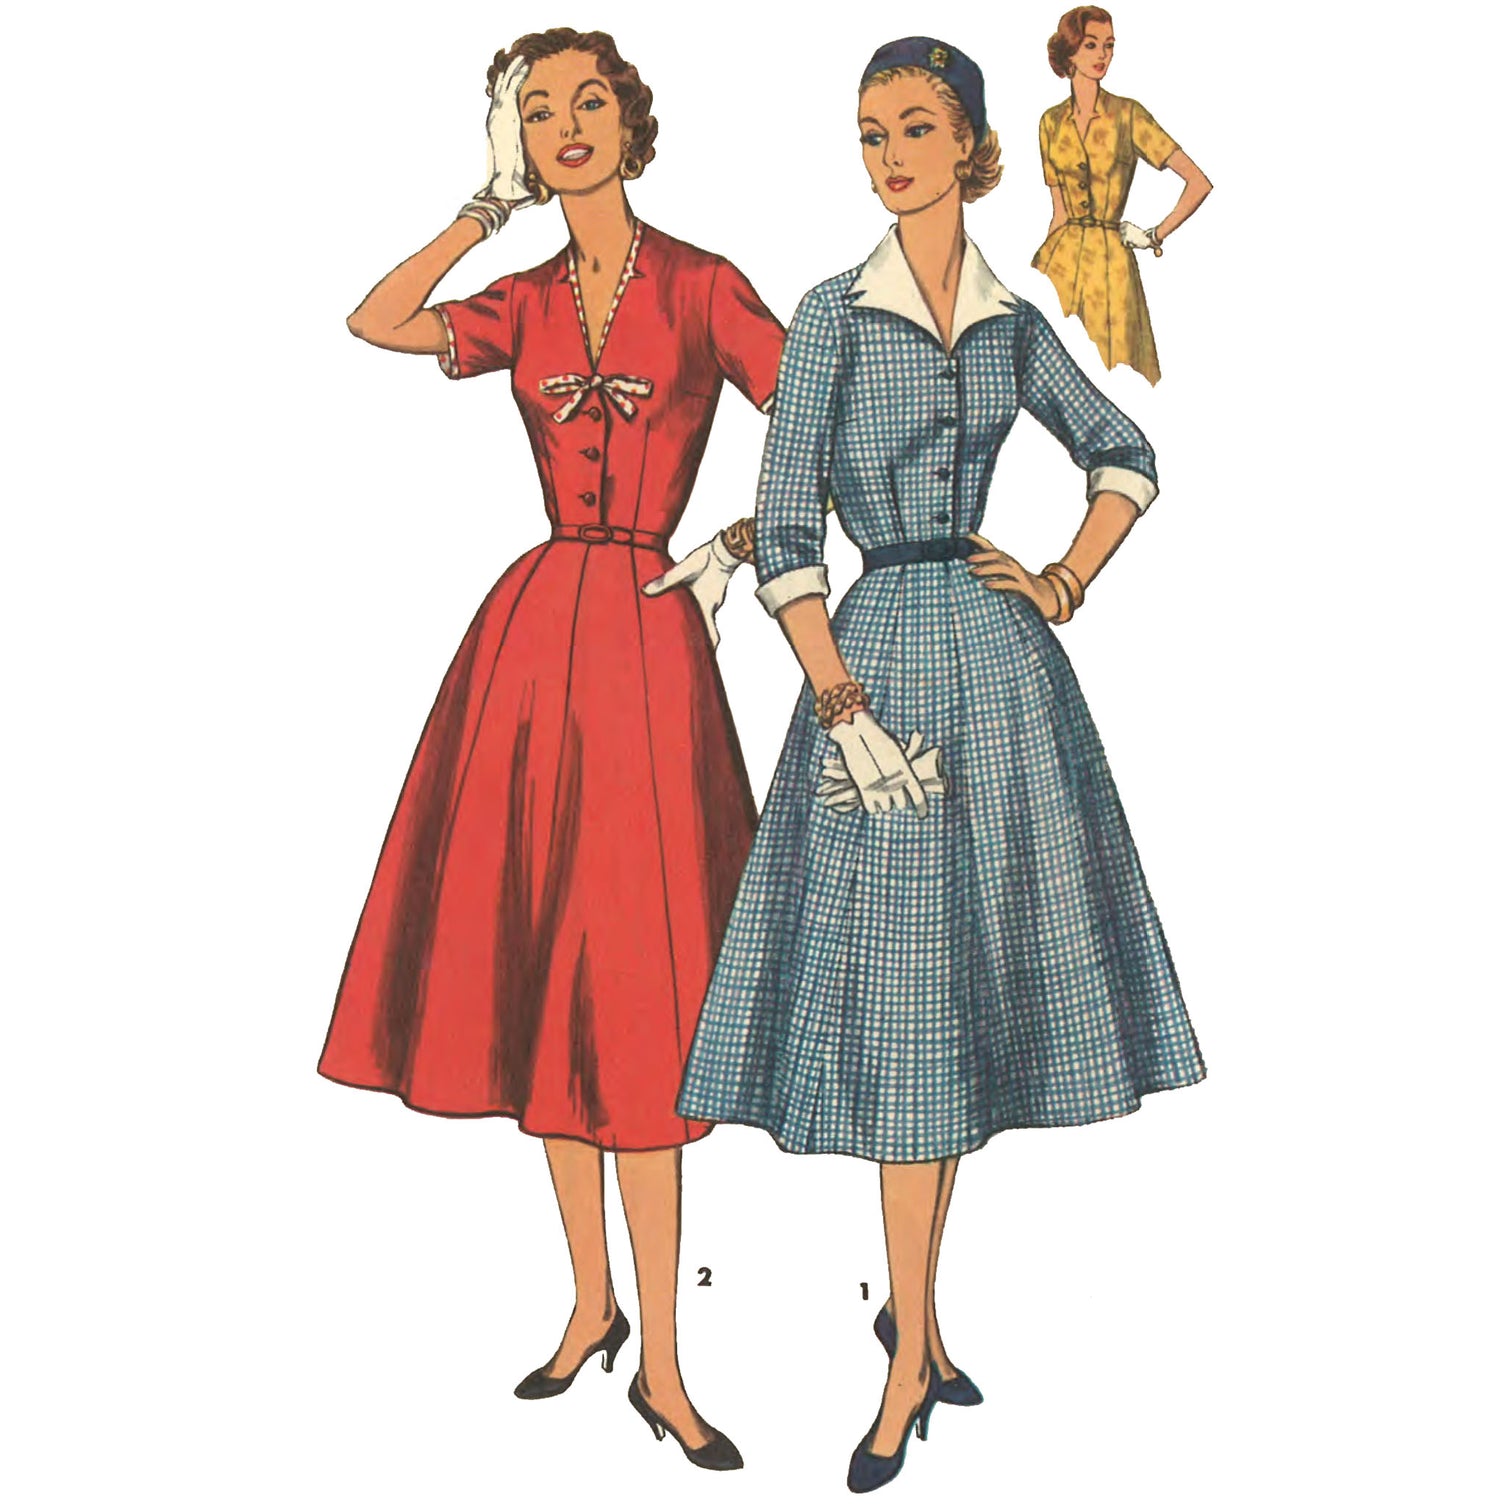 Women wearing fit and flared dresses.